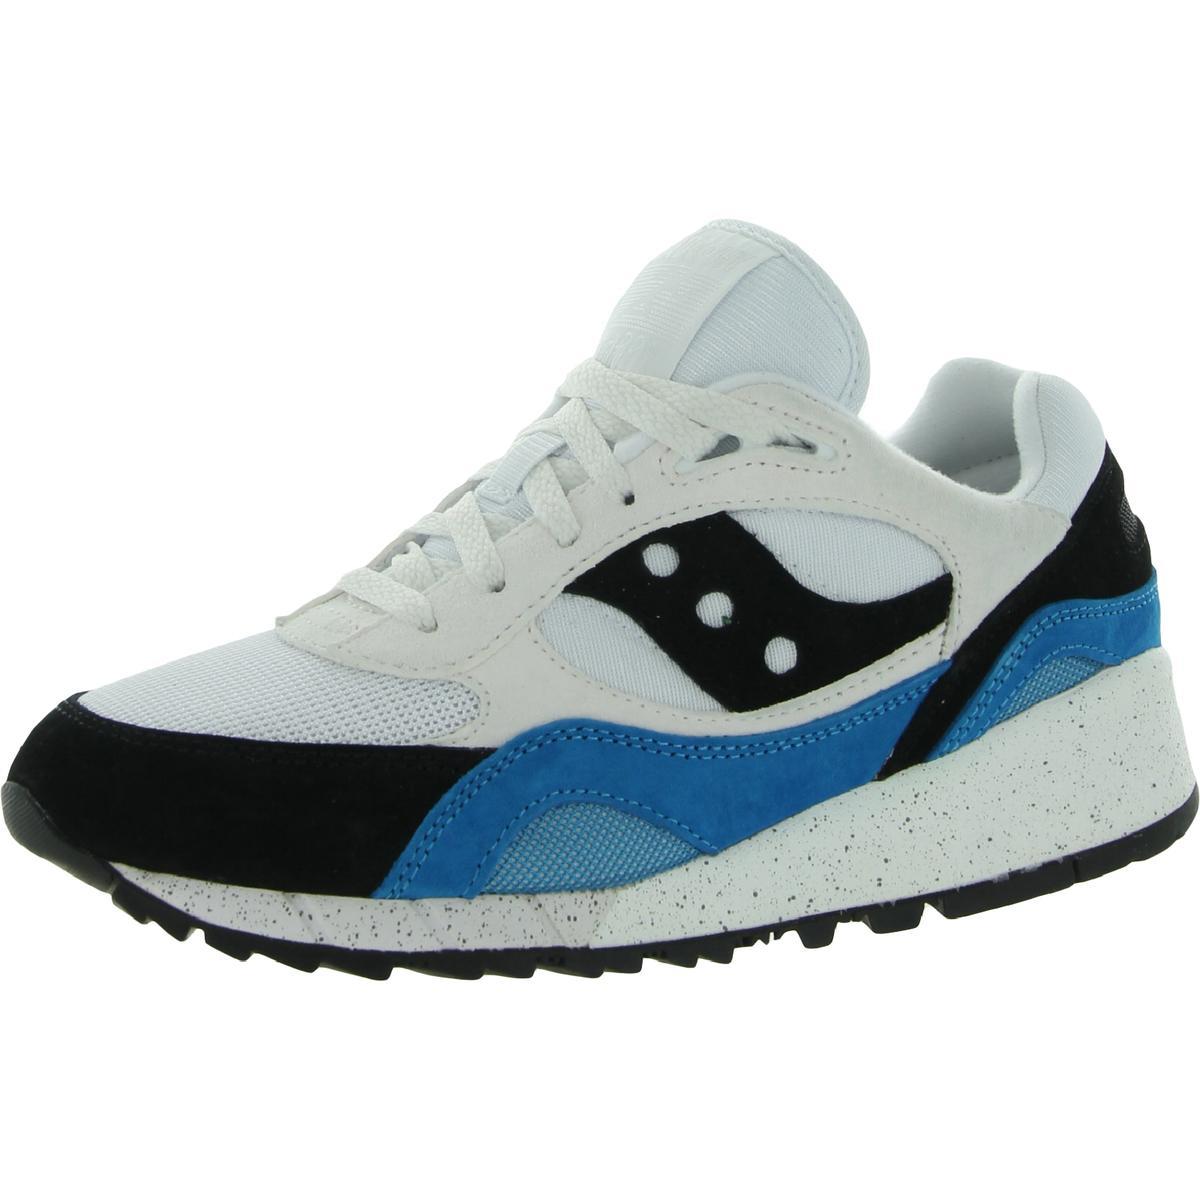 Saucony Men`s Shadow 6000 Leather Retro Inspired Athletic Fashion Sneaker White/Ensign